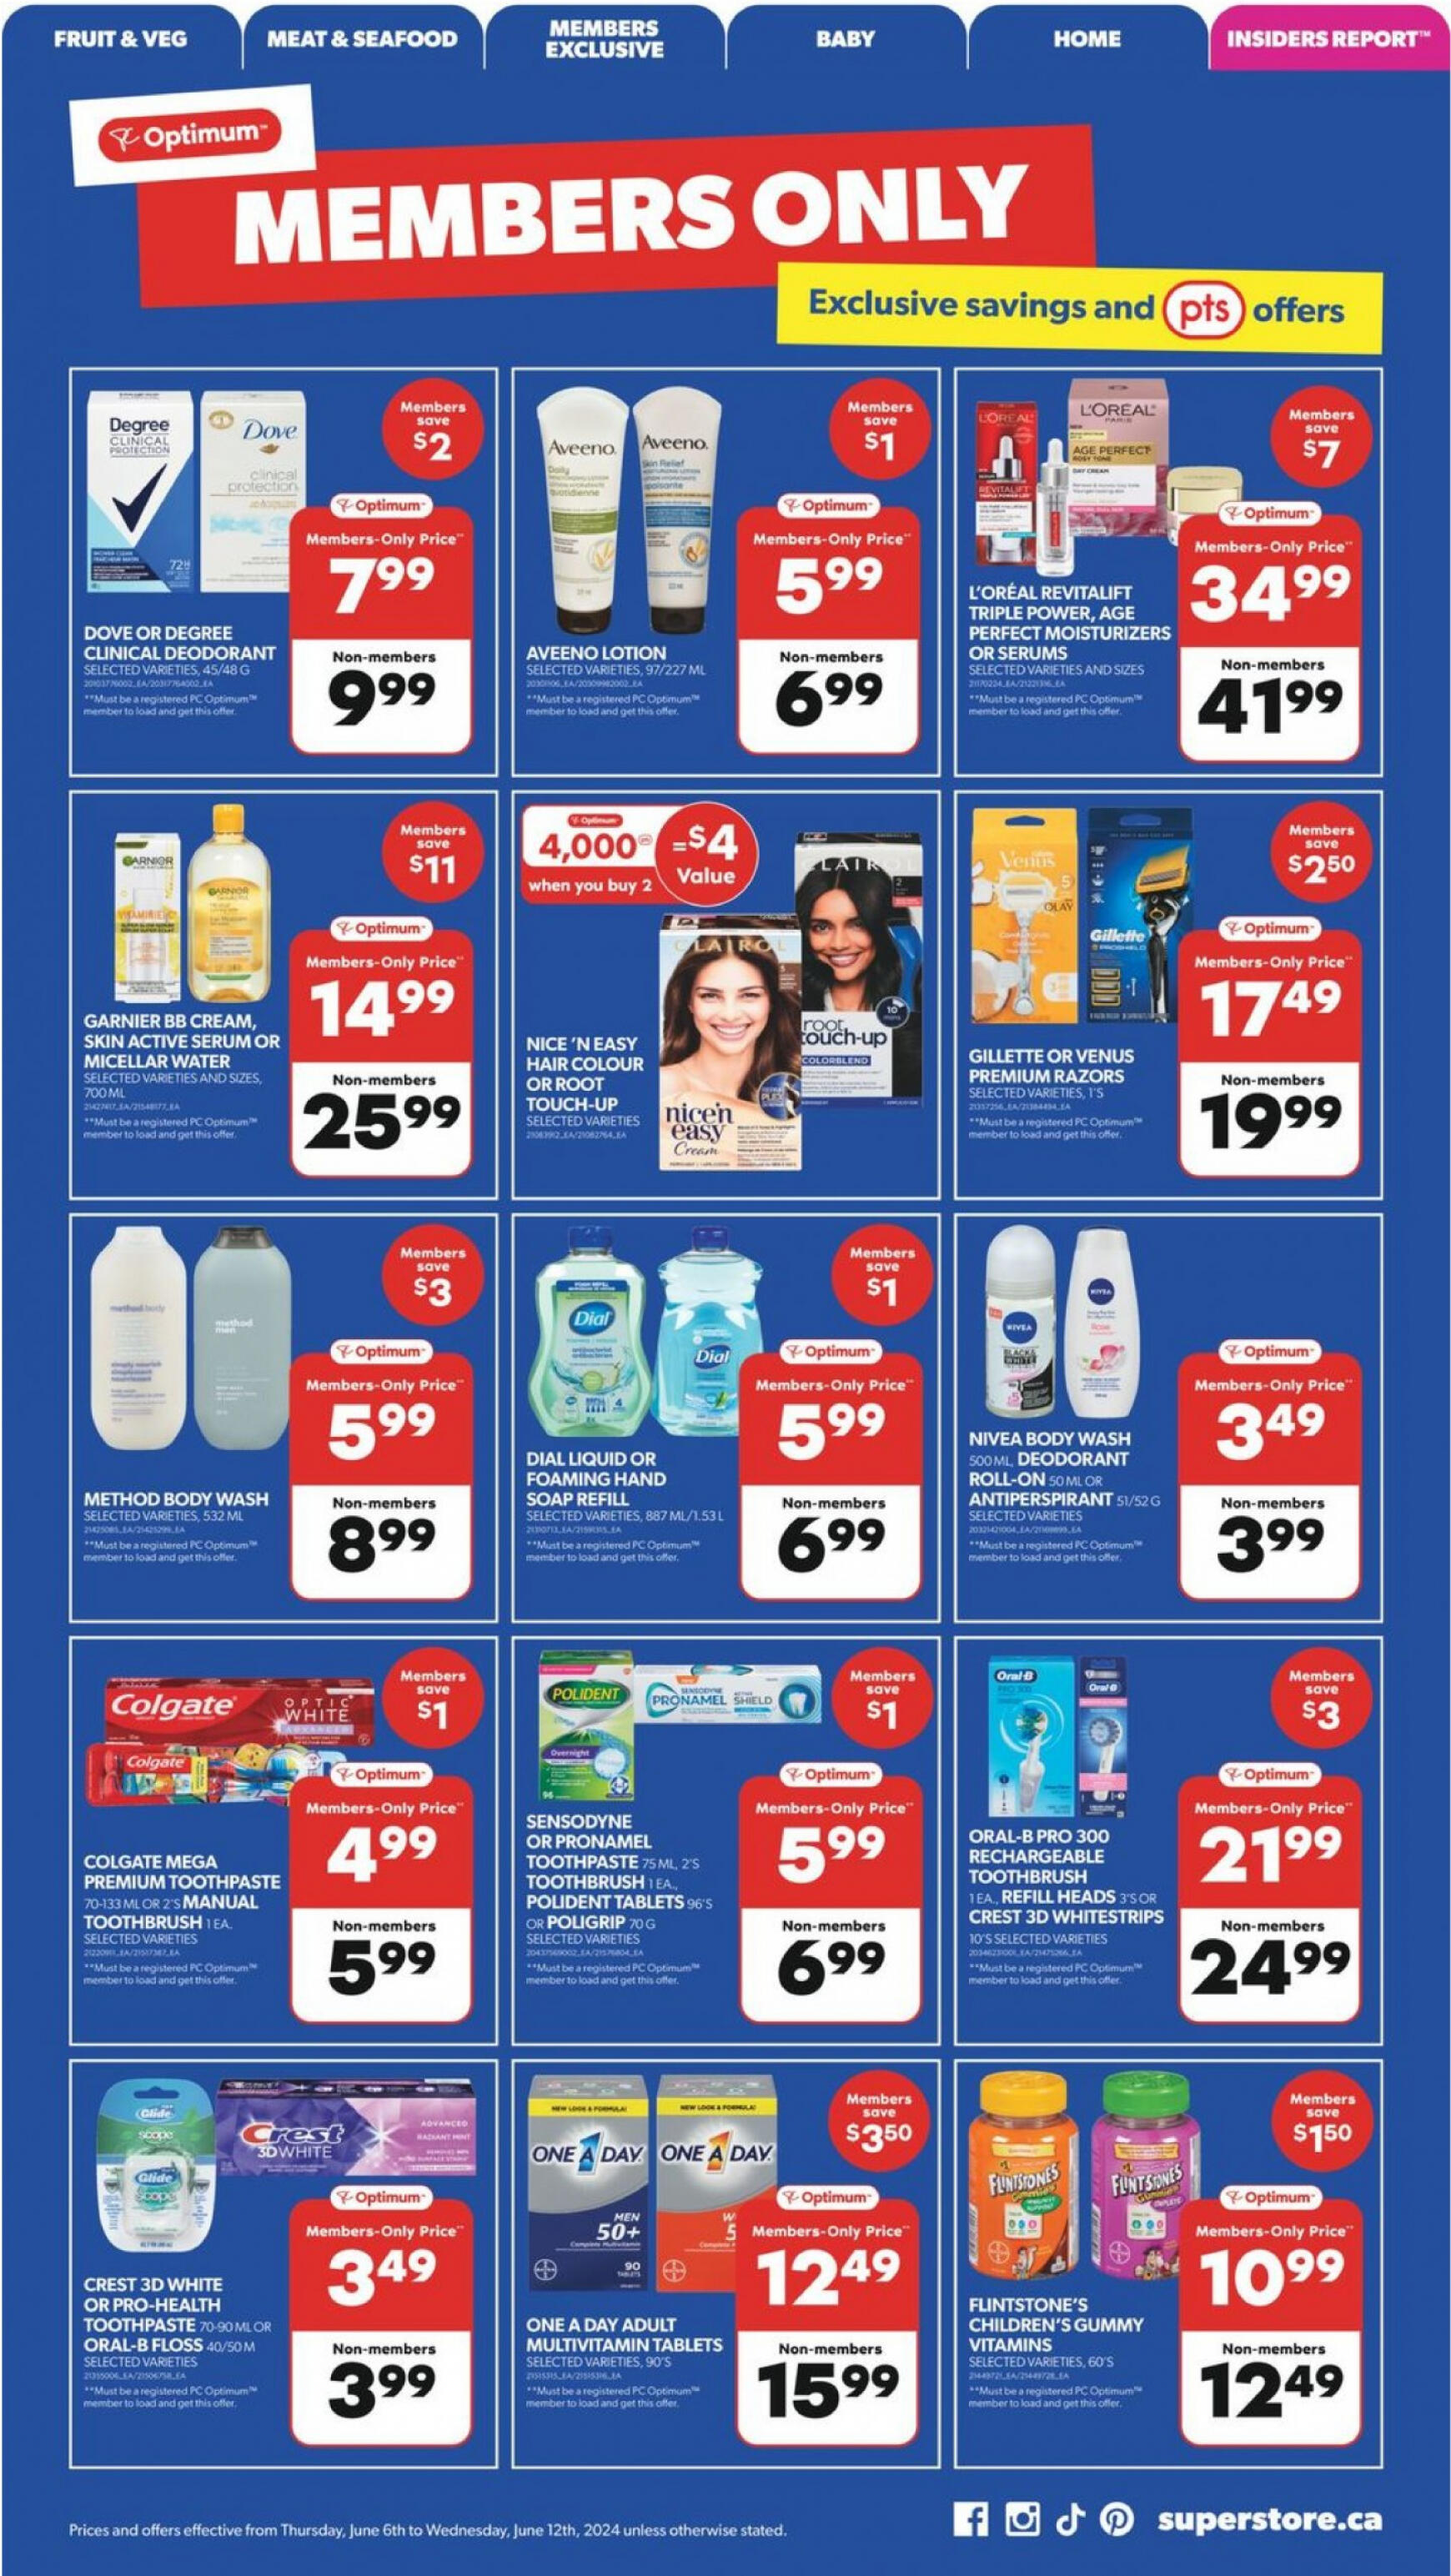 real-canadian-superstore - Real Canadian Superstore flyer current 06.06. - 12.06. - page: 9